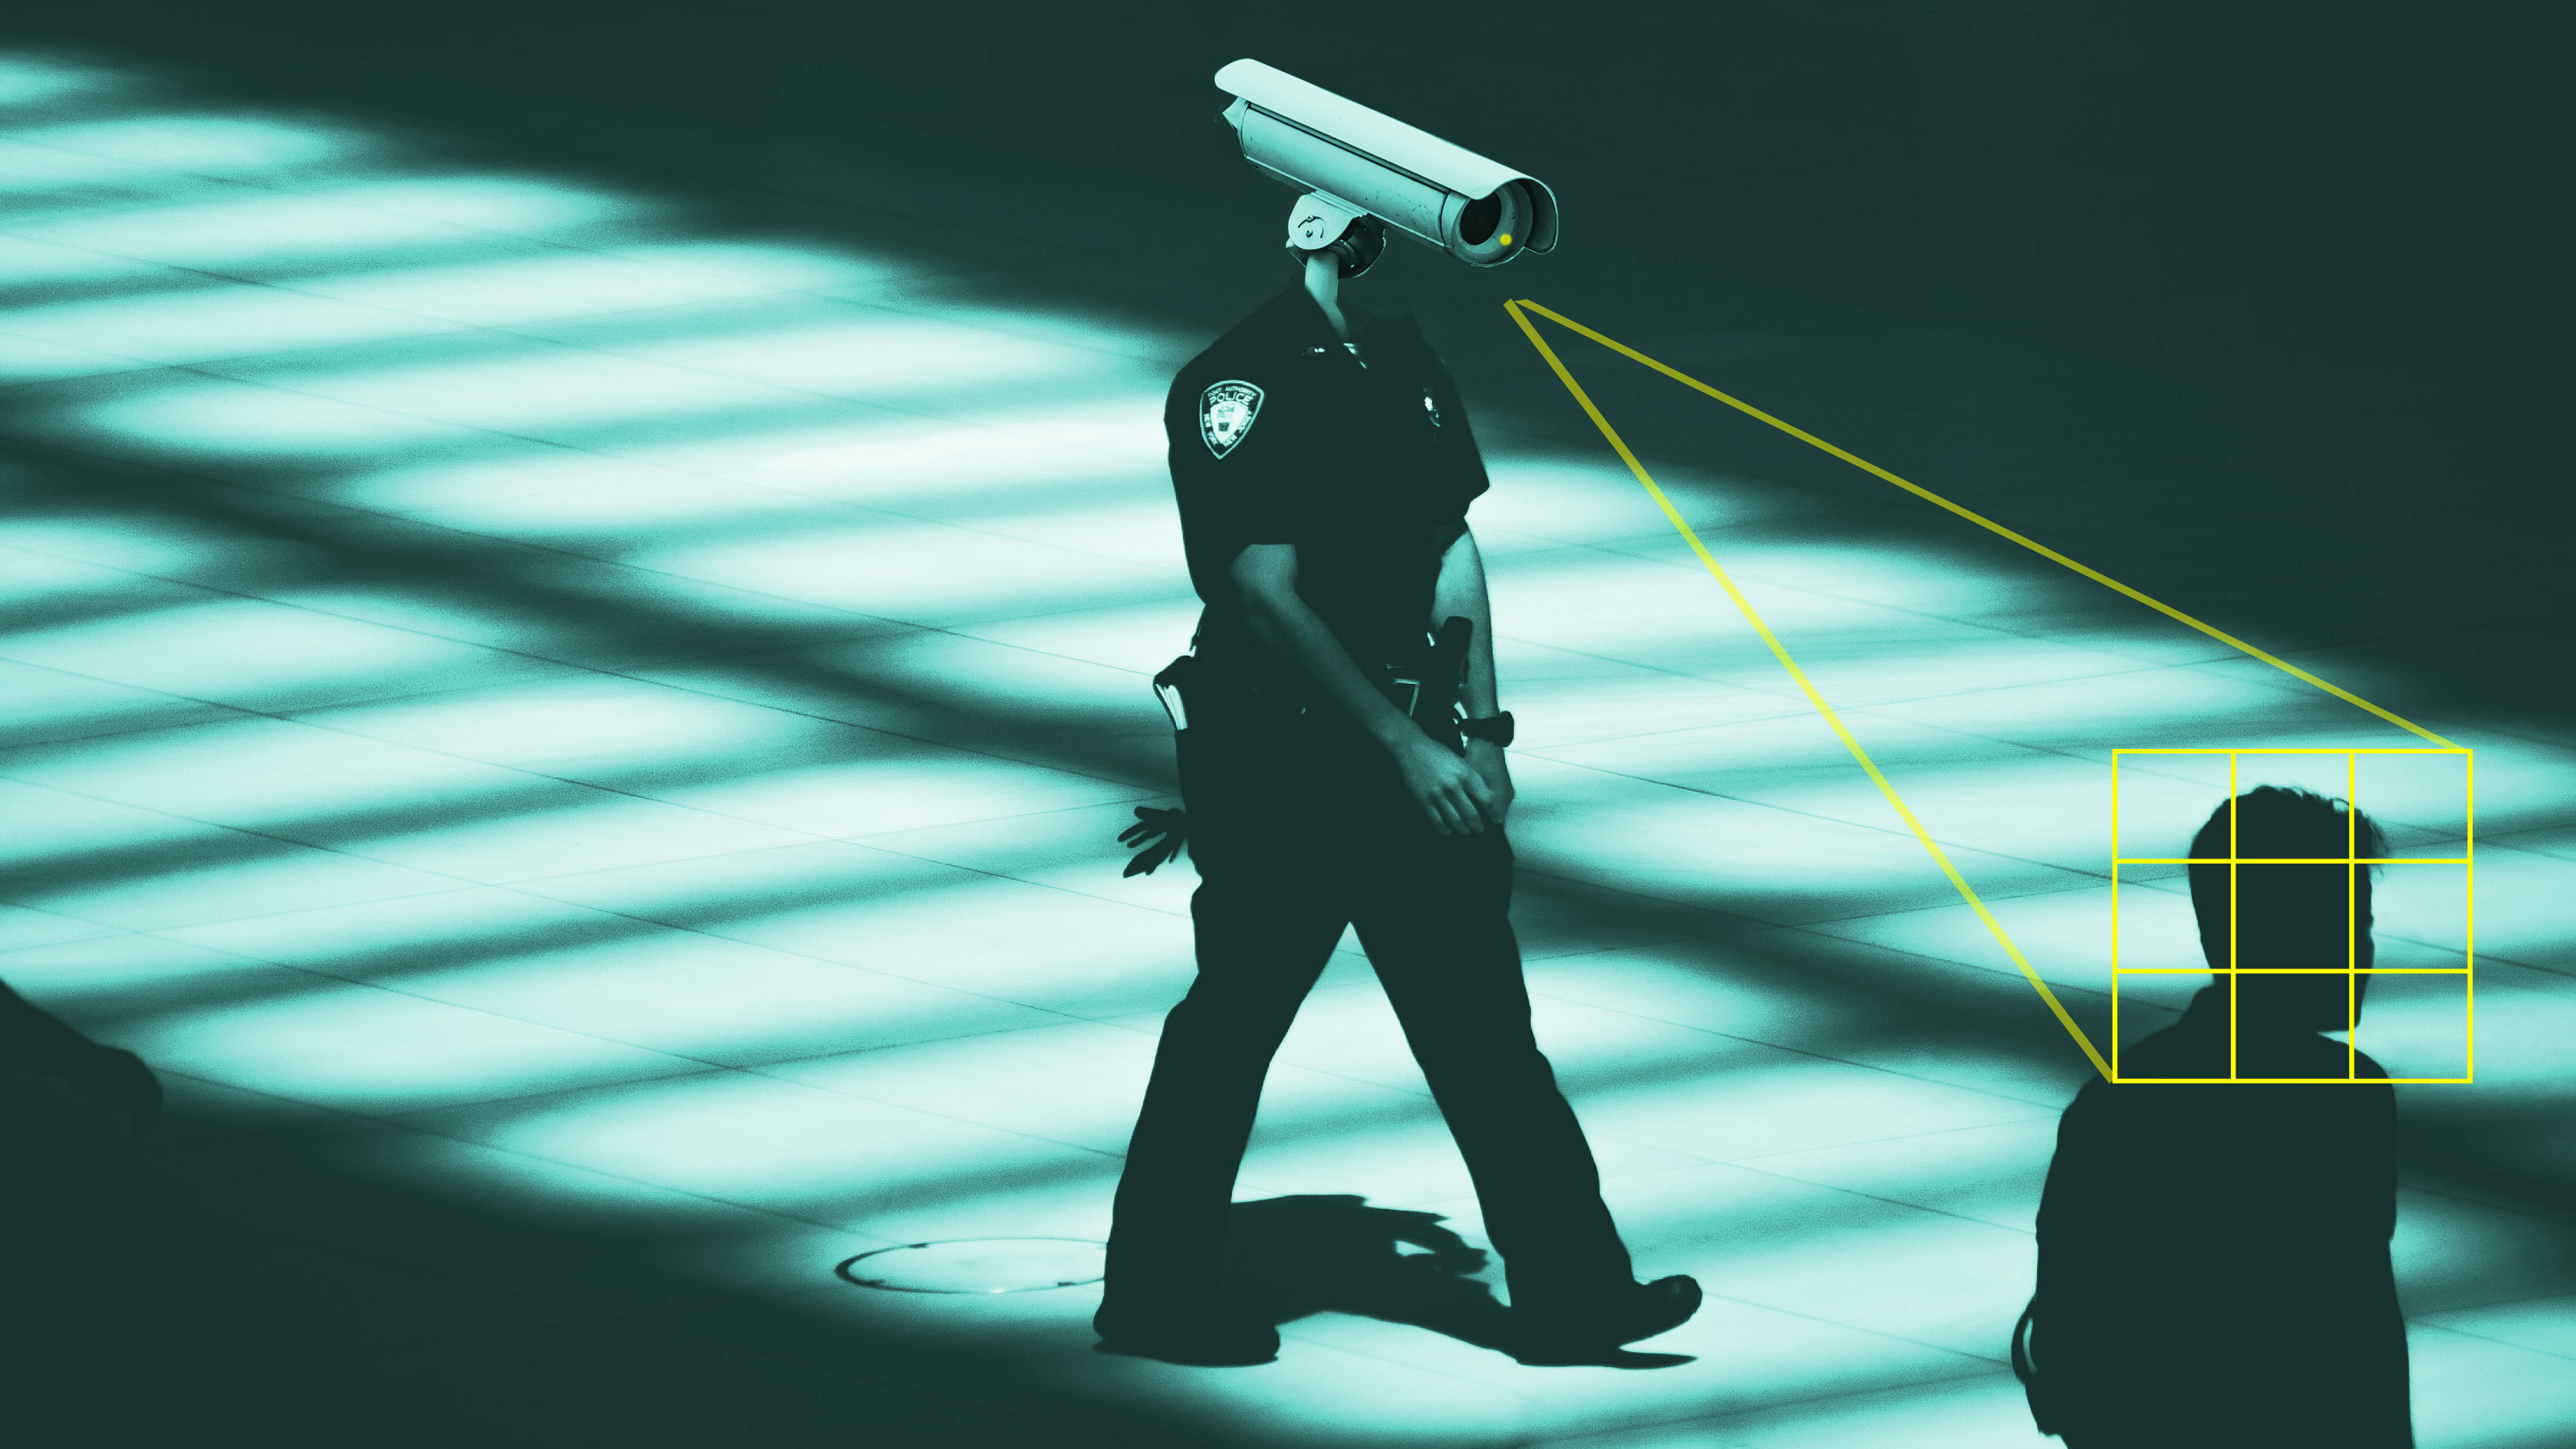 There is a crisis of face recognition and policing in the US thumbnail